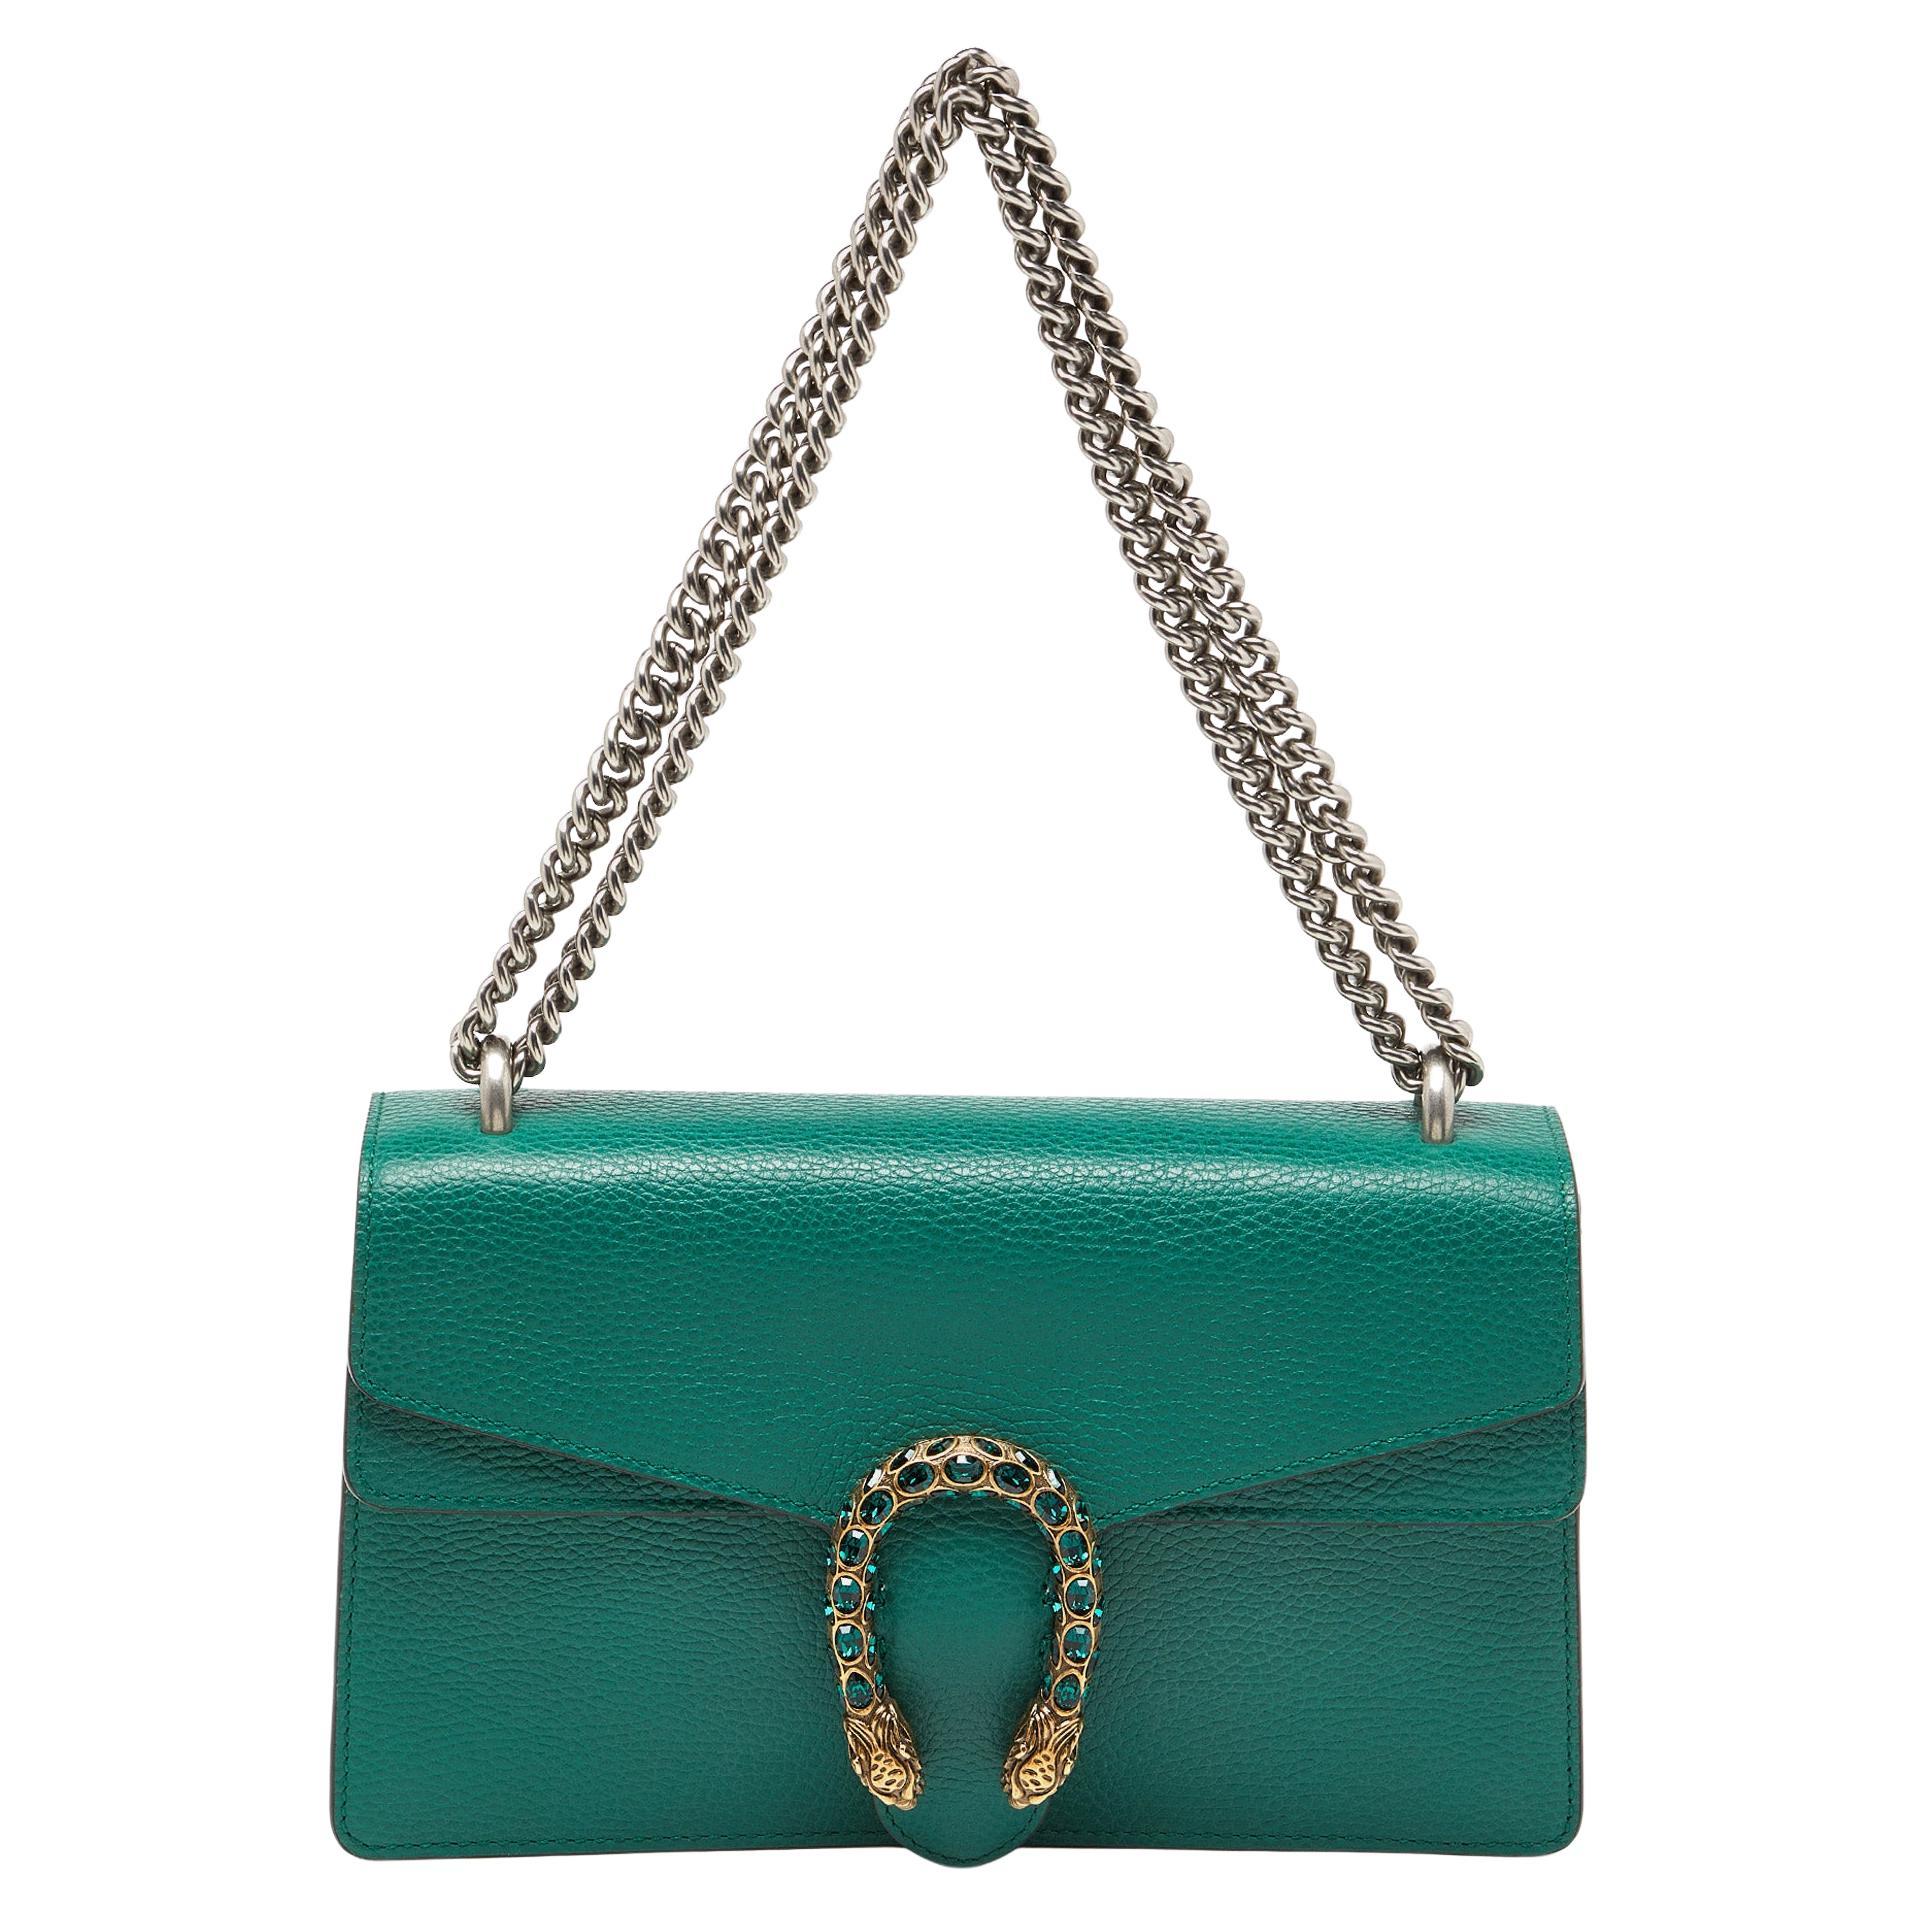 Gucci Green Leather Small Dionysus Crystals Shoulder Bag For Sale